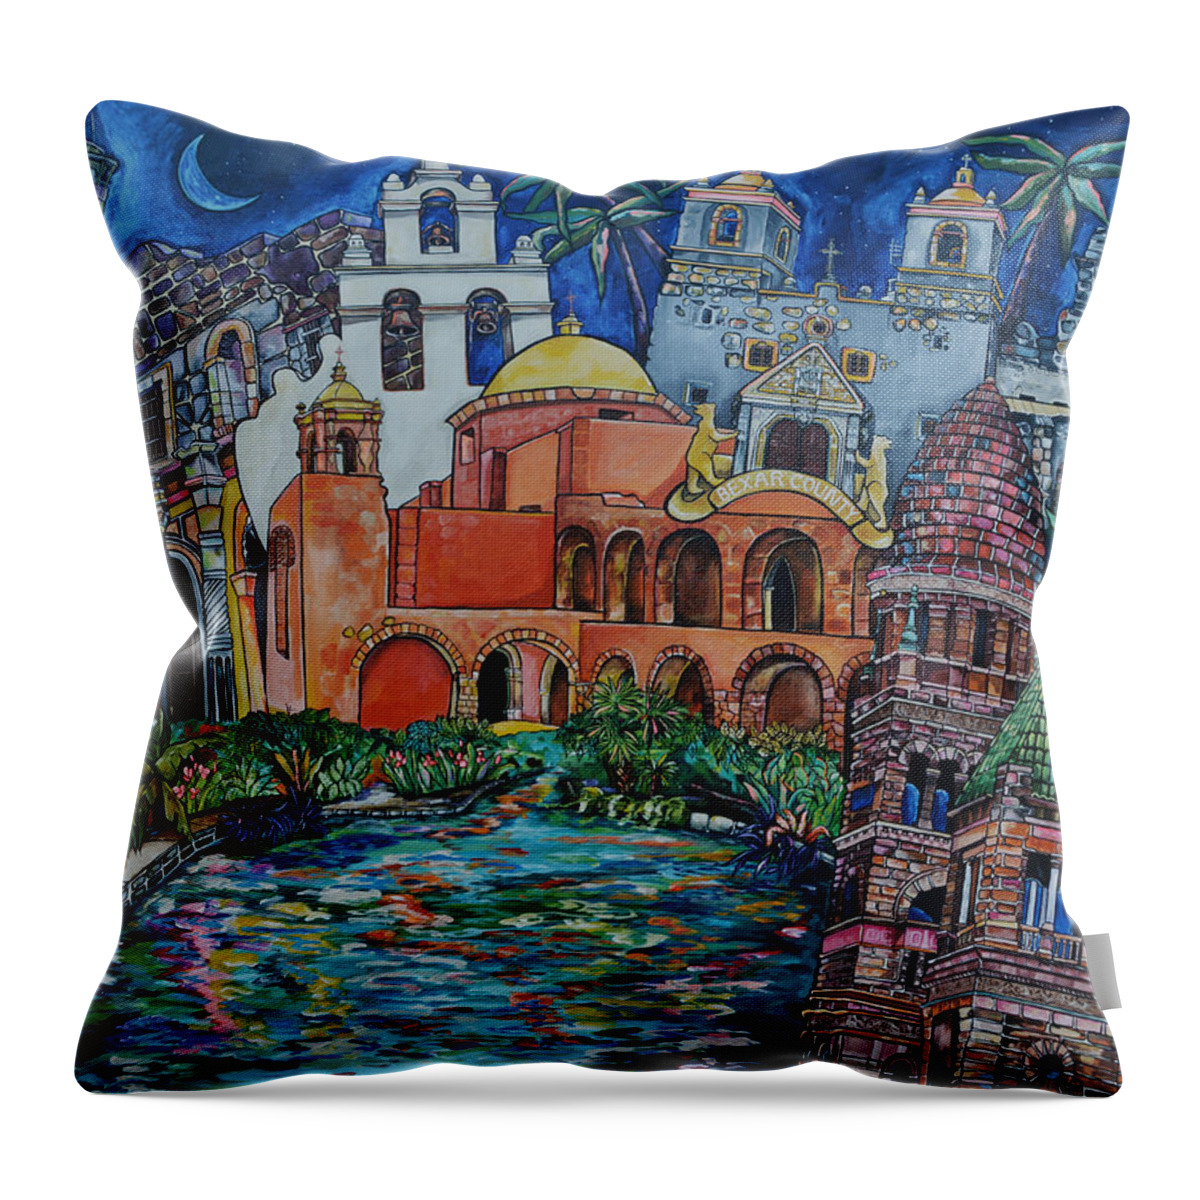 San Antonio Missions Throw Pillow featuring the painting Bexar County Missions by Patti Schermerhorn